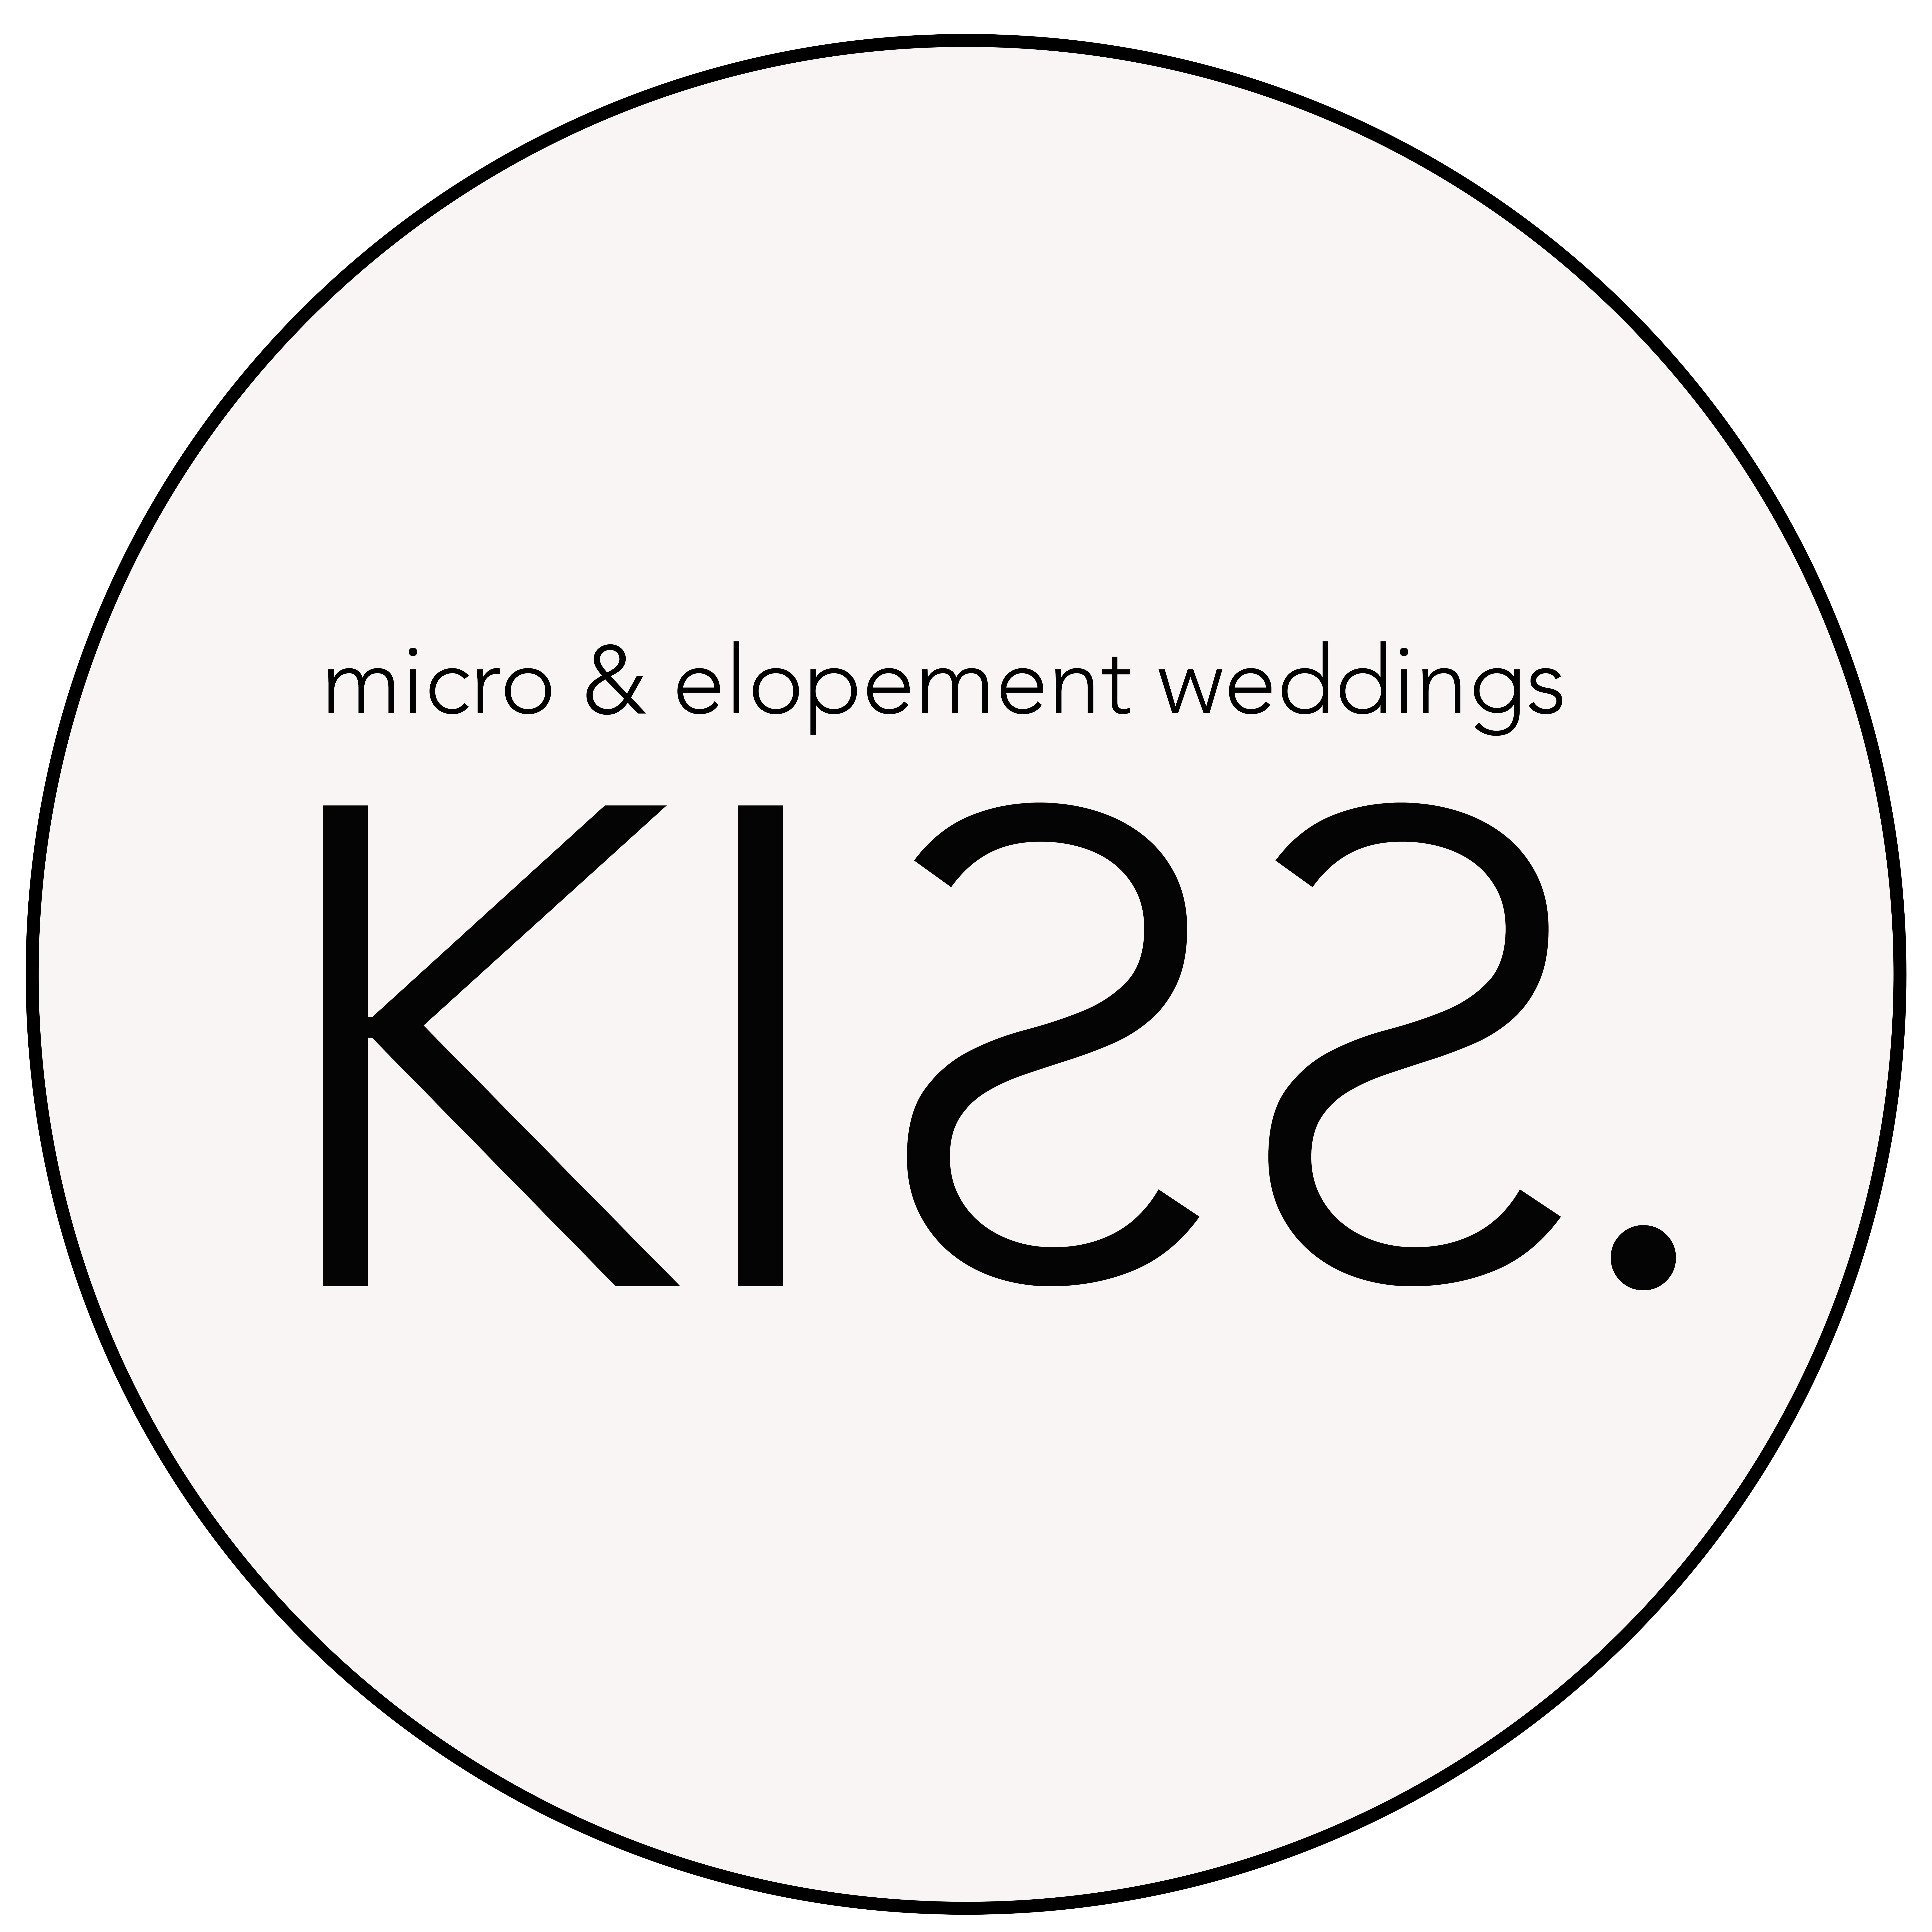 Marriage laws in Australia. Micro & Elopement Weddings by KISS Package